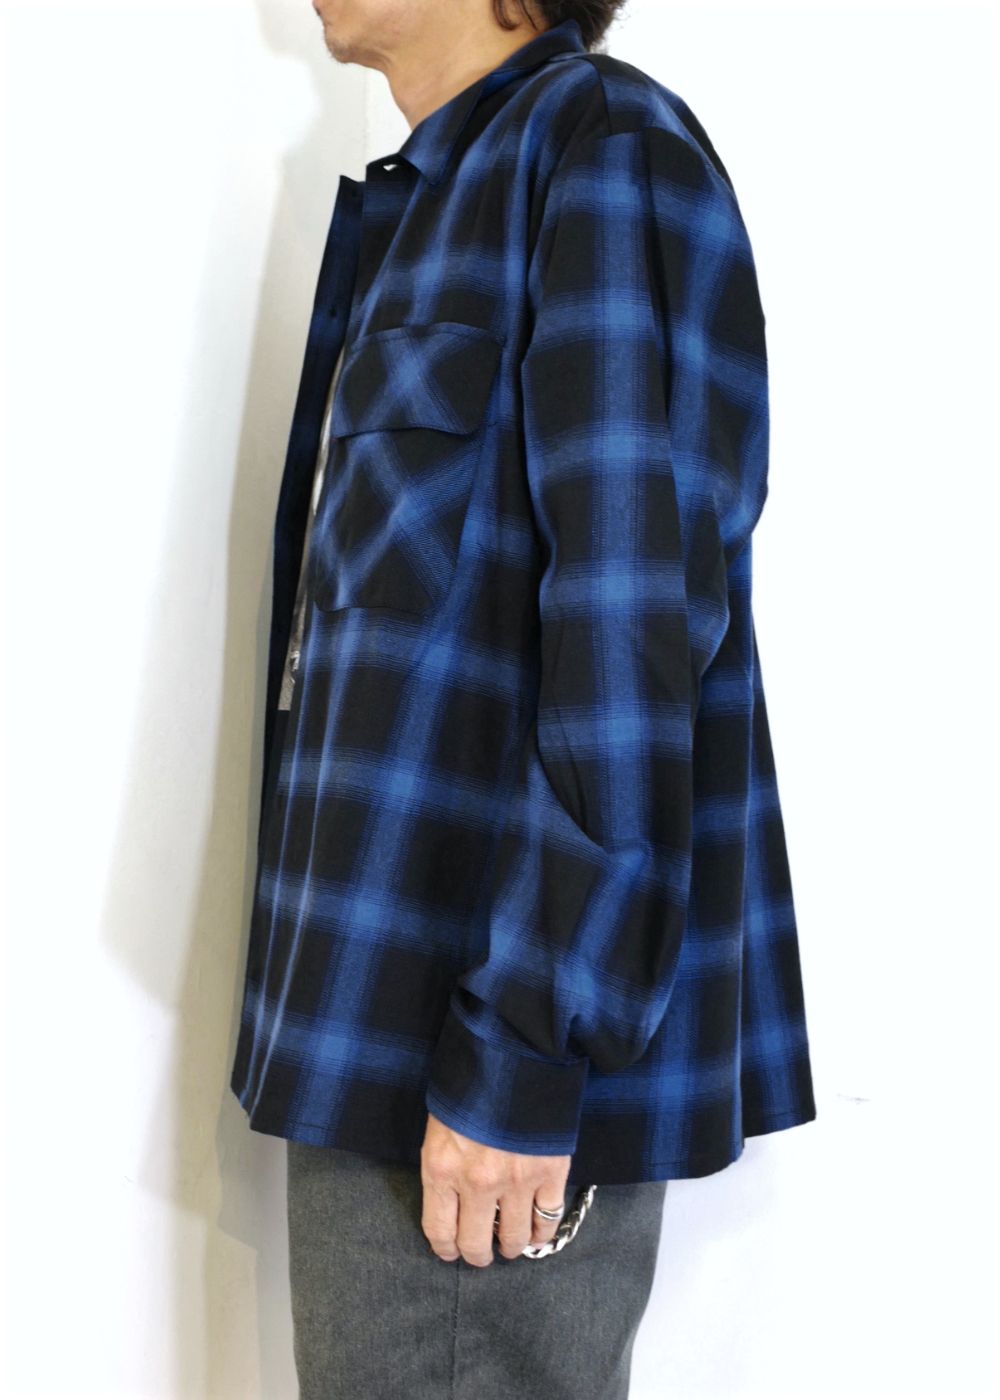 HIDE AND SEEK - OMBRE CHECK L/S SHIRT (BLUE) / オンブレチェック ...